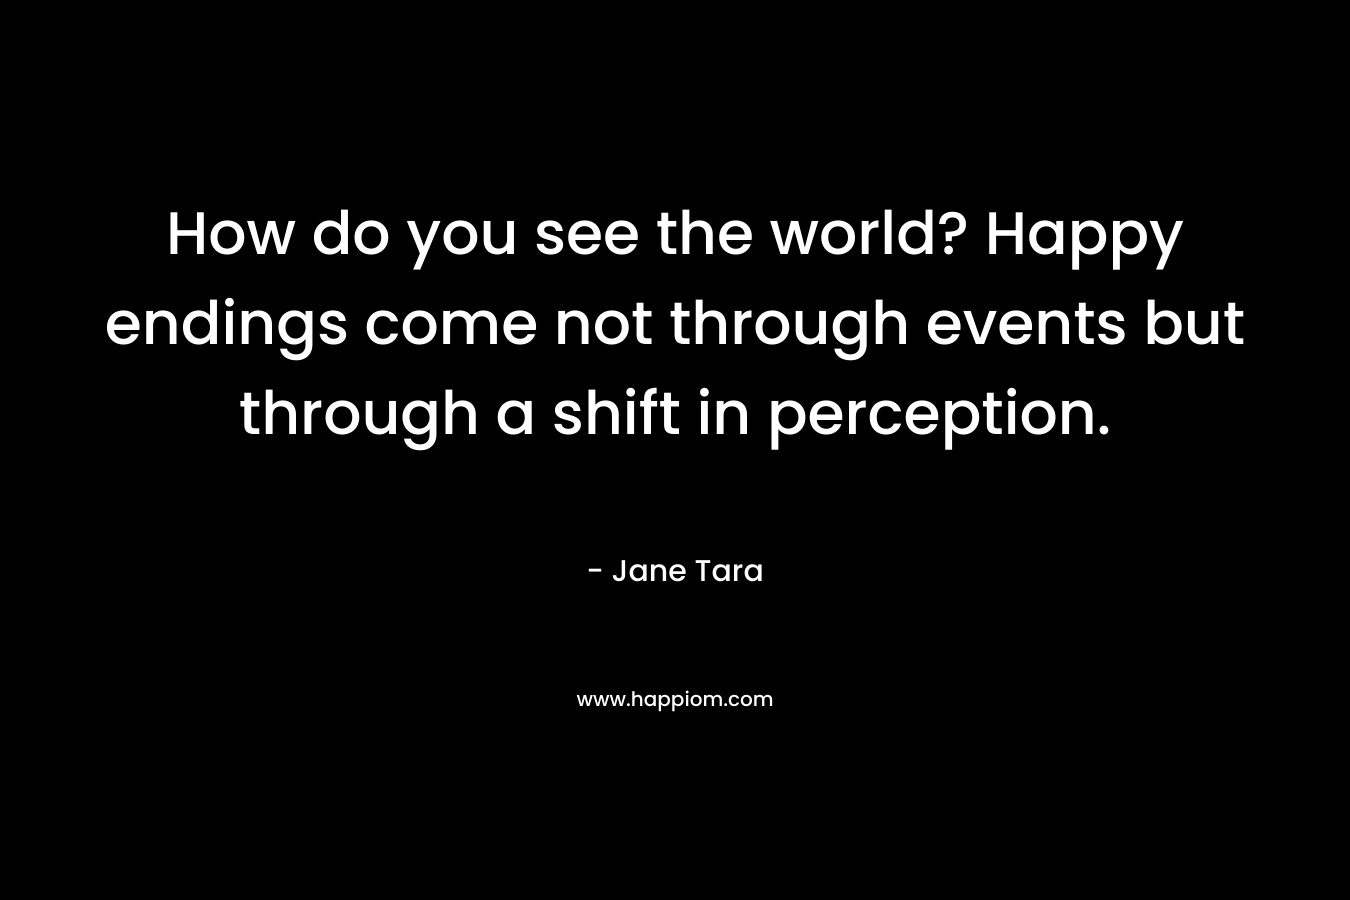 How do you see the world? Happy endings come not through events but through a shift in perception. – Jane Tara